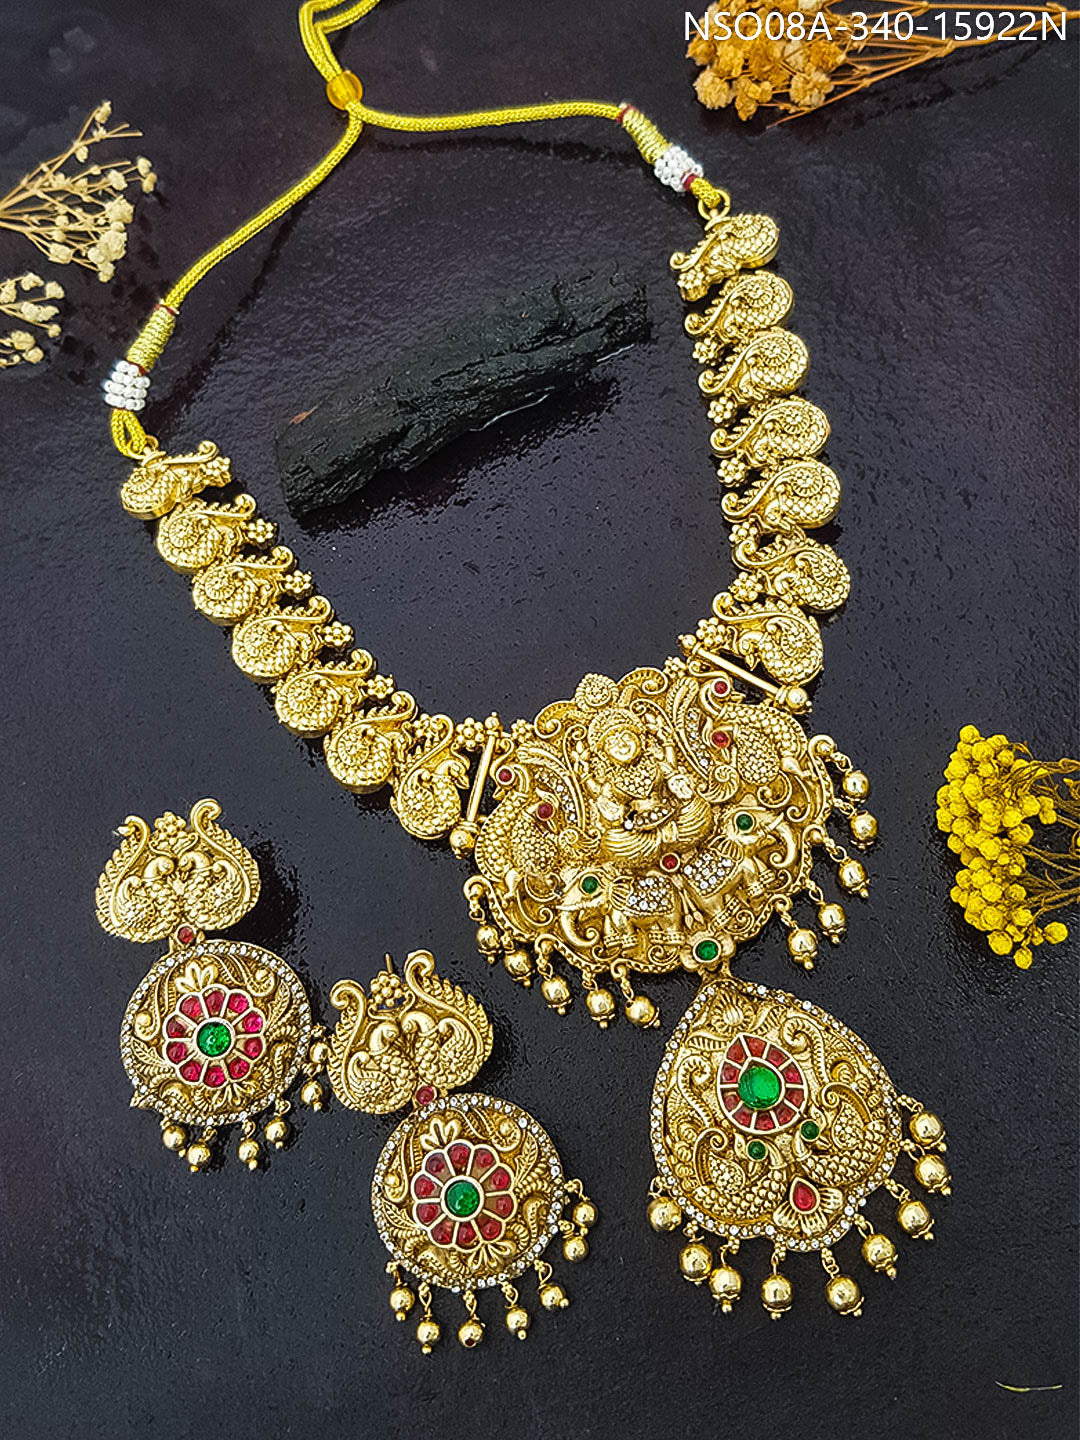 Antique Gold Plated Long Necklace Set 15922N